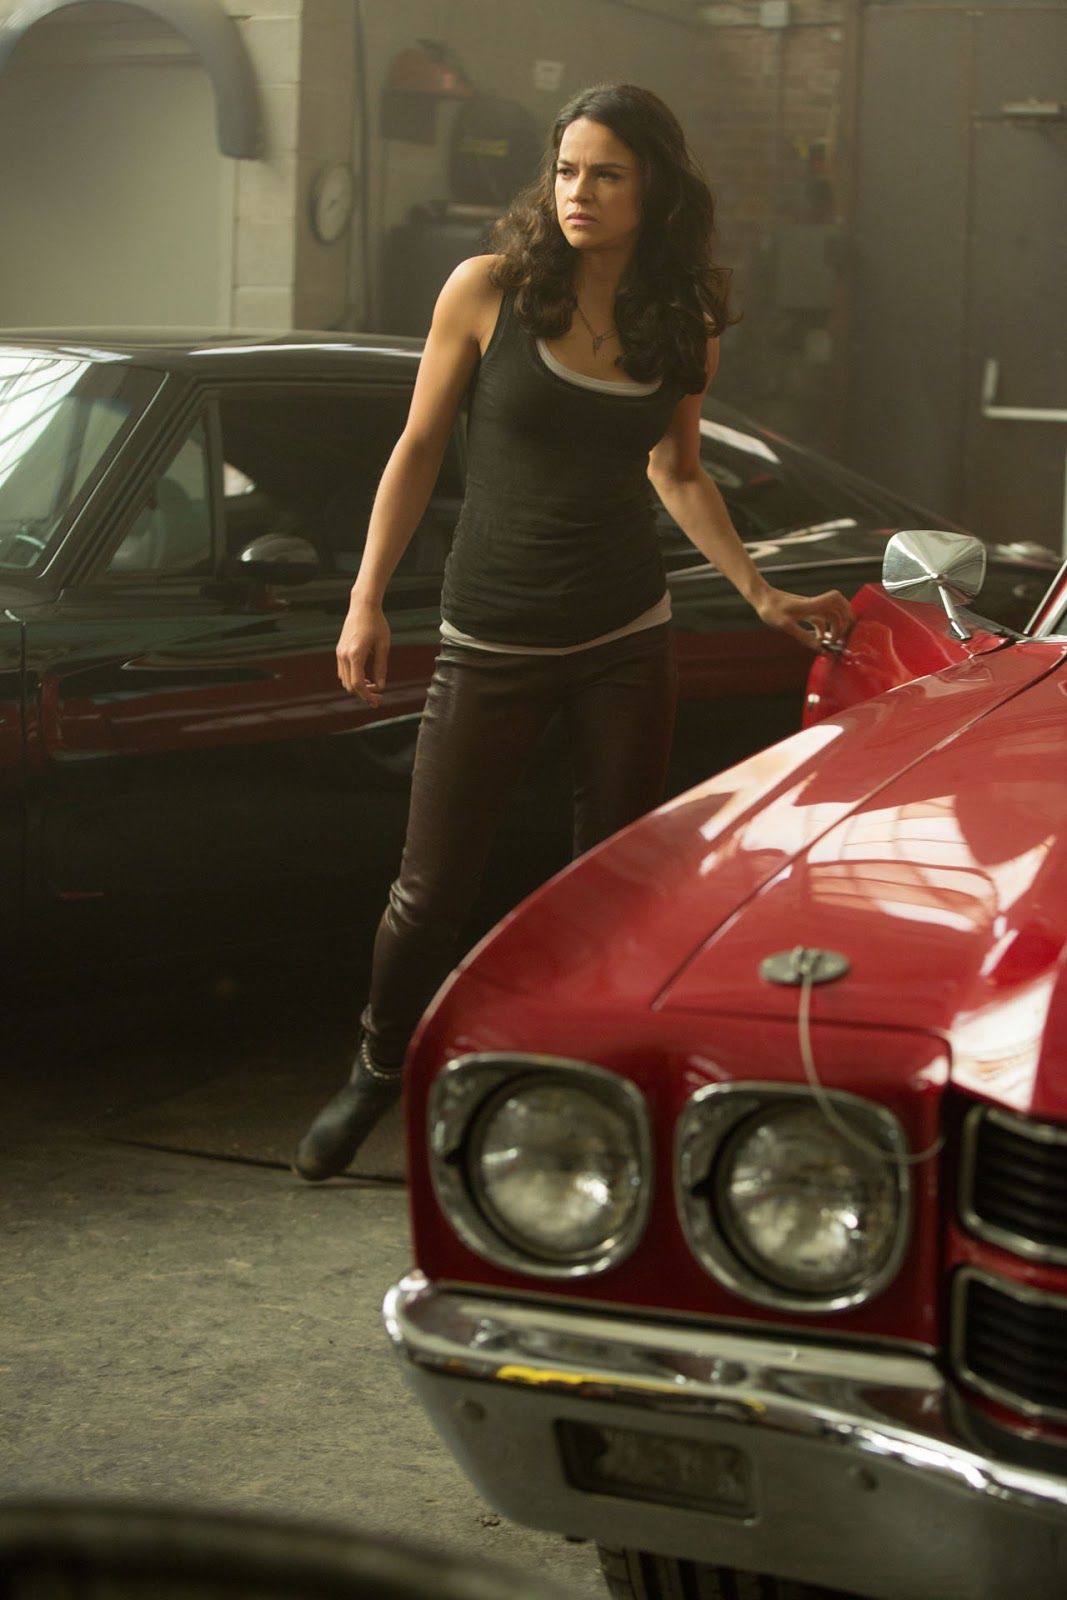 The Fate of the Furious Michelle Rodriguez Image 2 (25). Fast and furious letty, Fast and furious, Michelle rodriguez